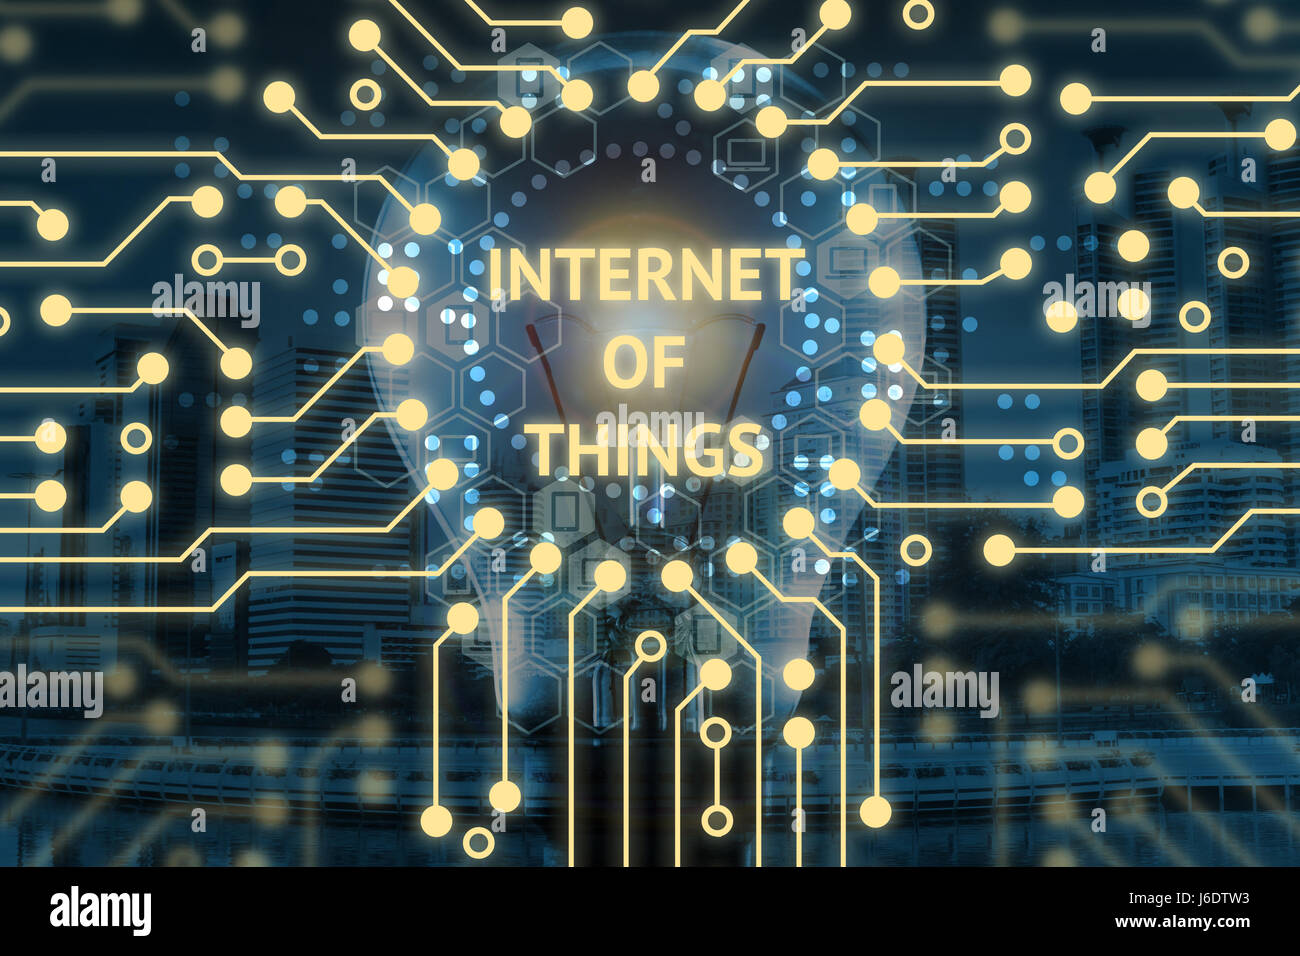 Internet of things (IoT) and digital lifestyle concept . Light bulb and Electric circuits graphic background with Infographic , texts. Stock Photo